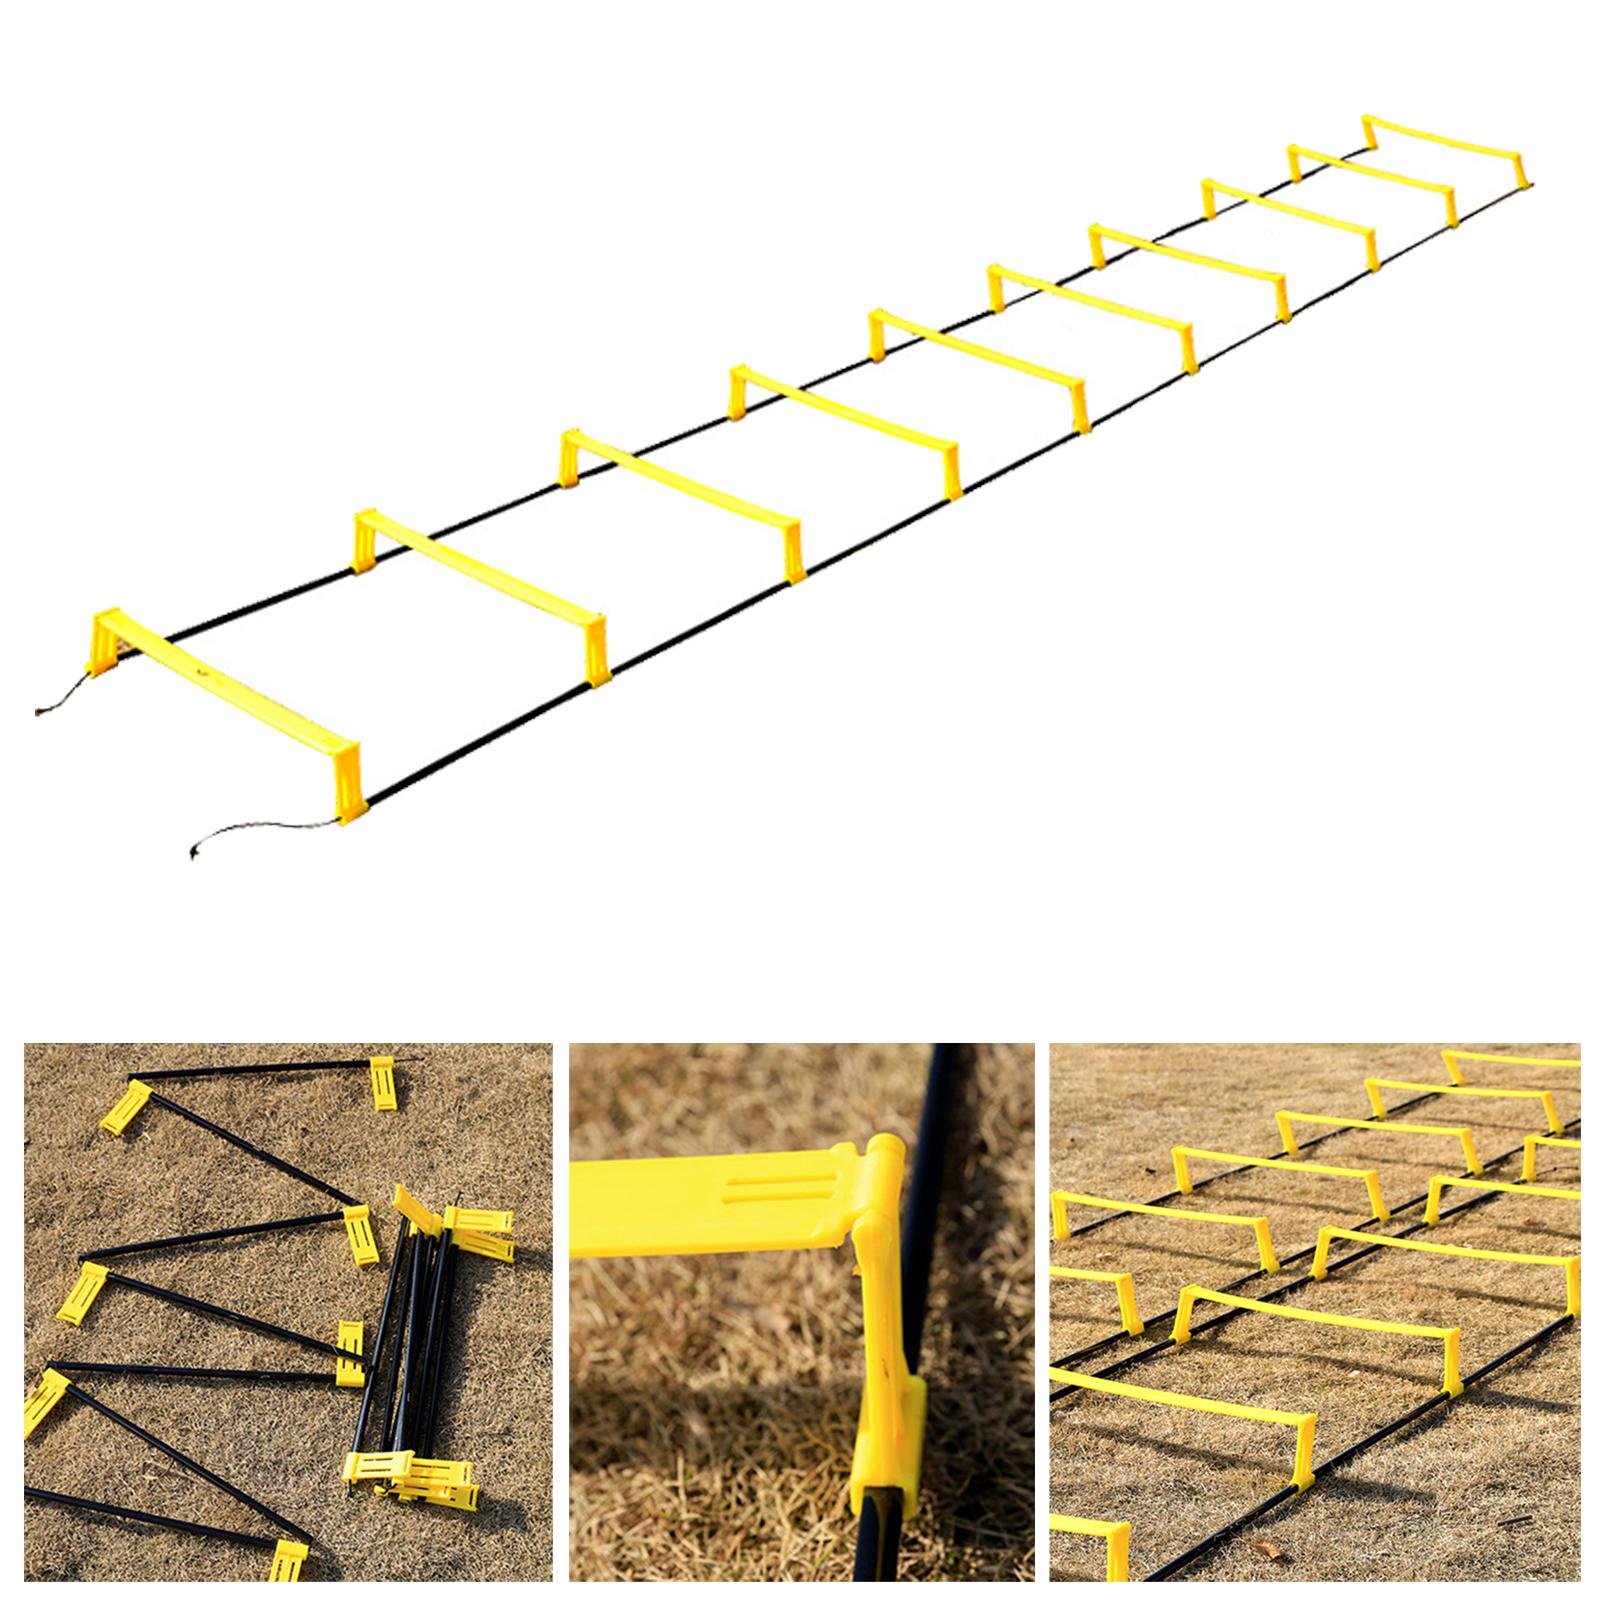 Training Ladder with Hurdles Agility Speed for Basketball Sports, 10pcs - image 3 of 8